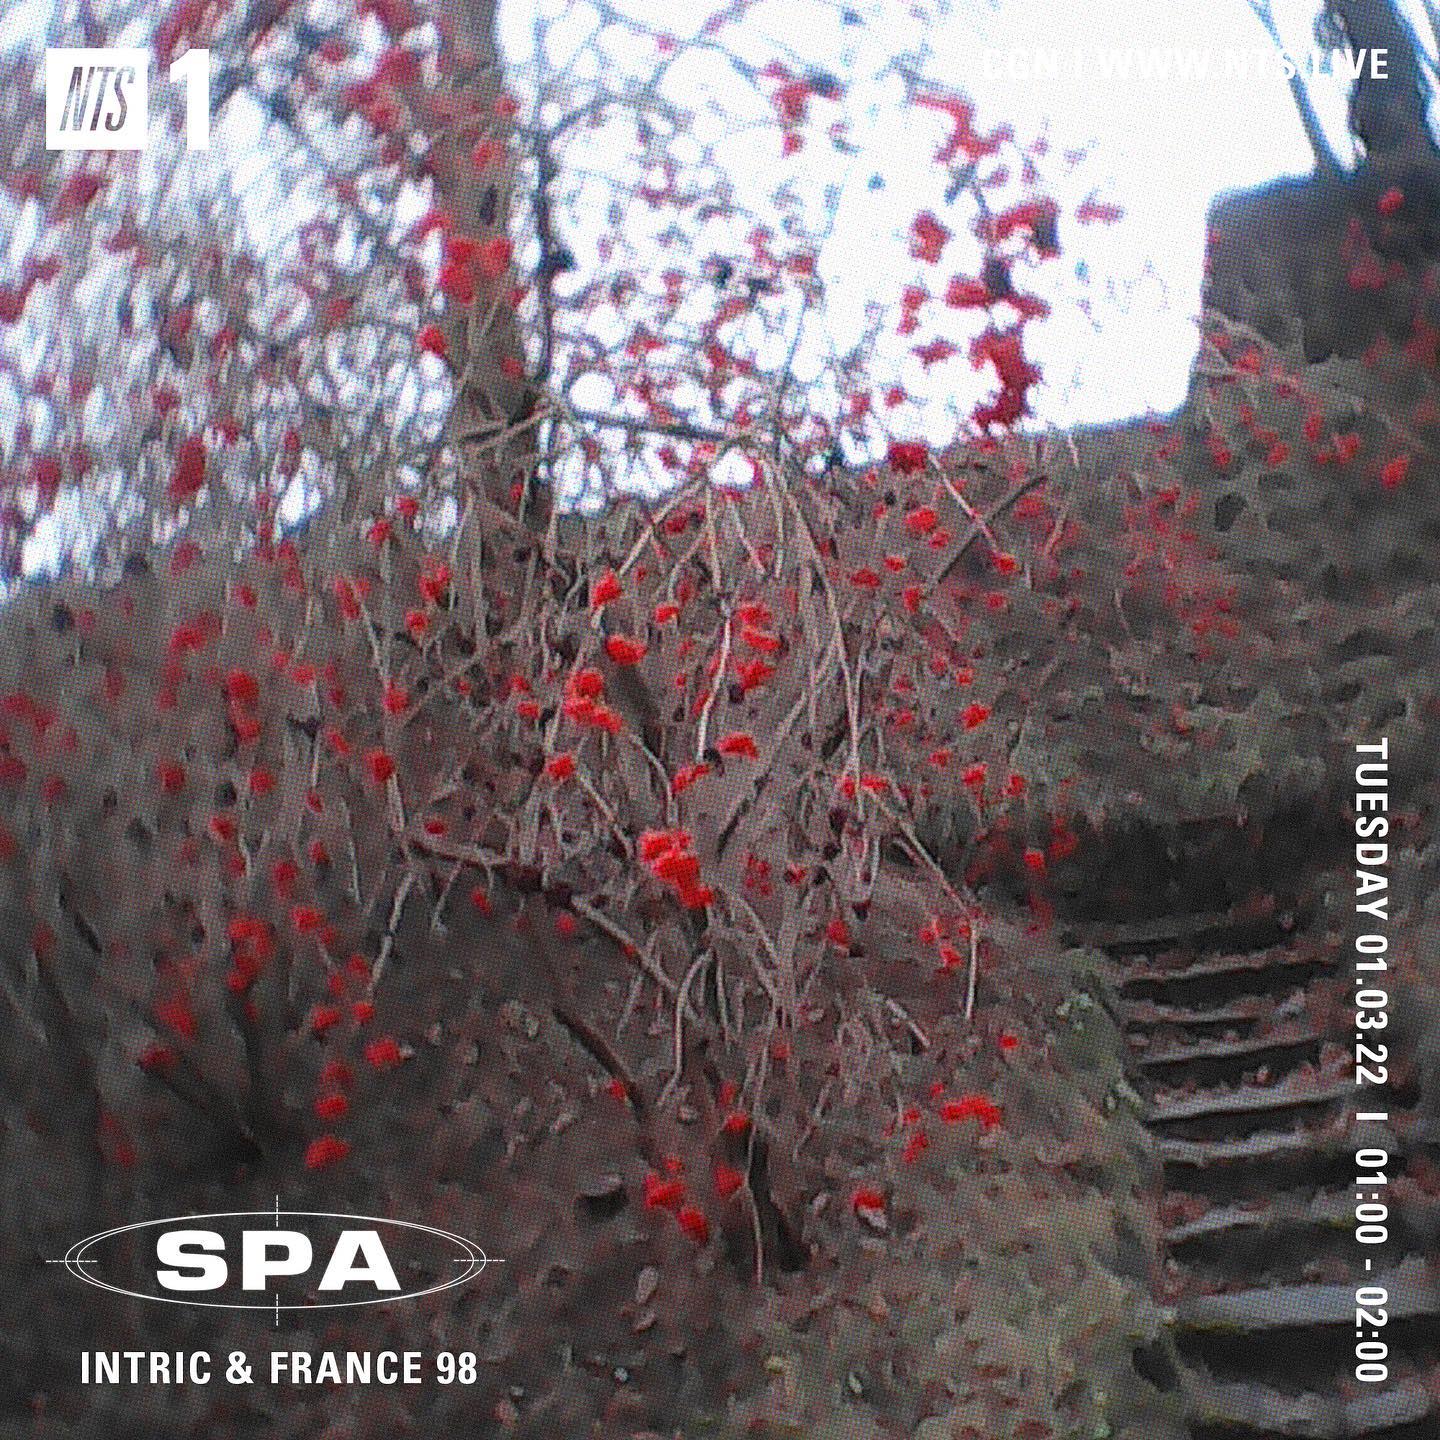 SPA #22: Intric & France ’98 for NTS Radio